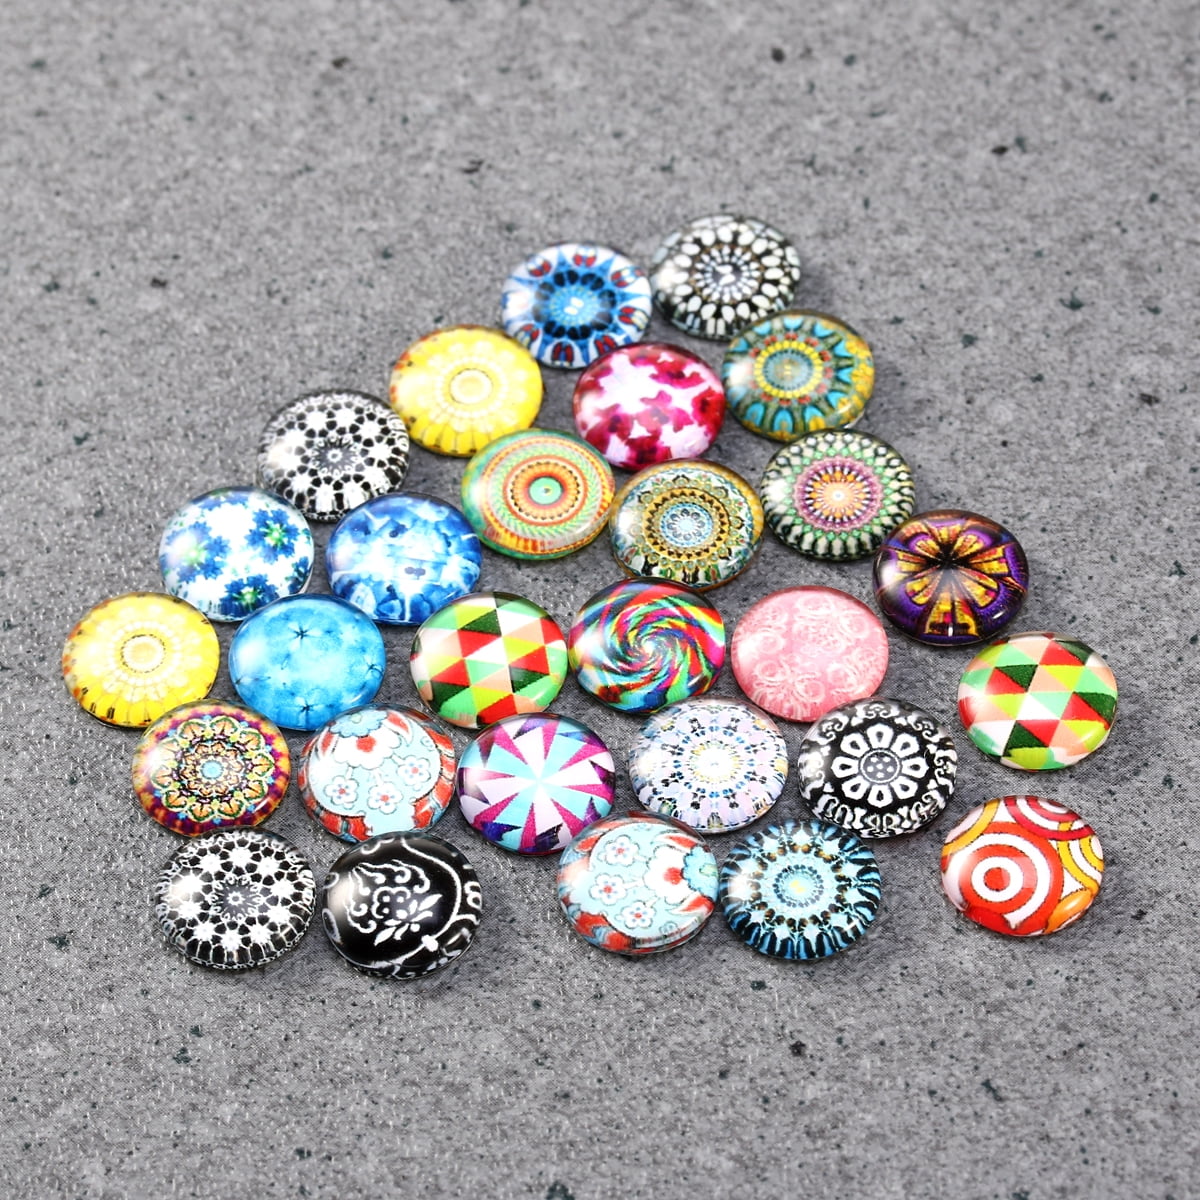 200pcs 12mm Mixed Round Mosaic Tiles for Crafts Glass Mosaic for Jewelry Making 